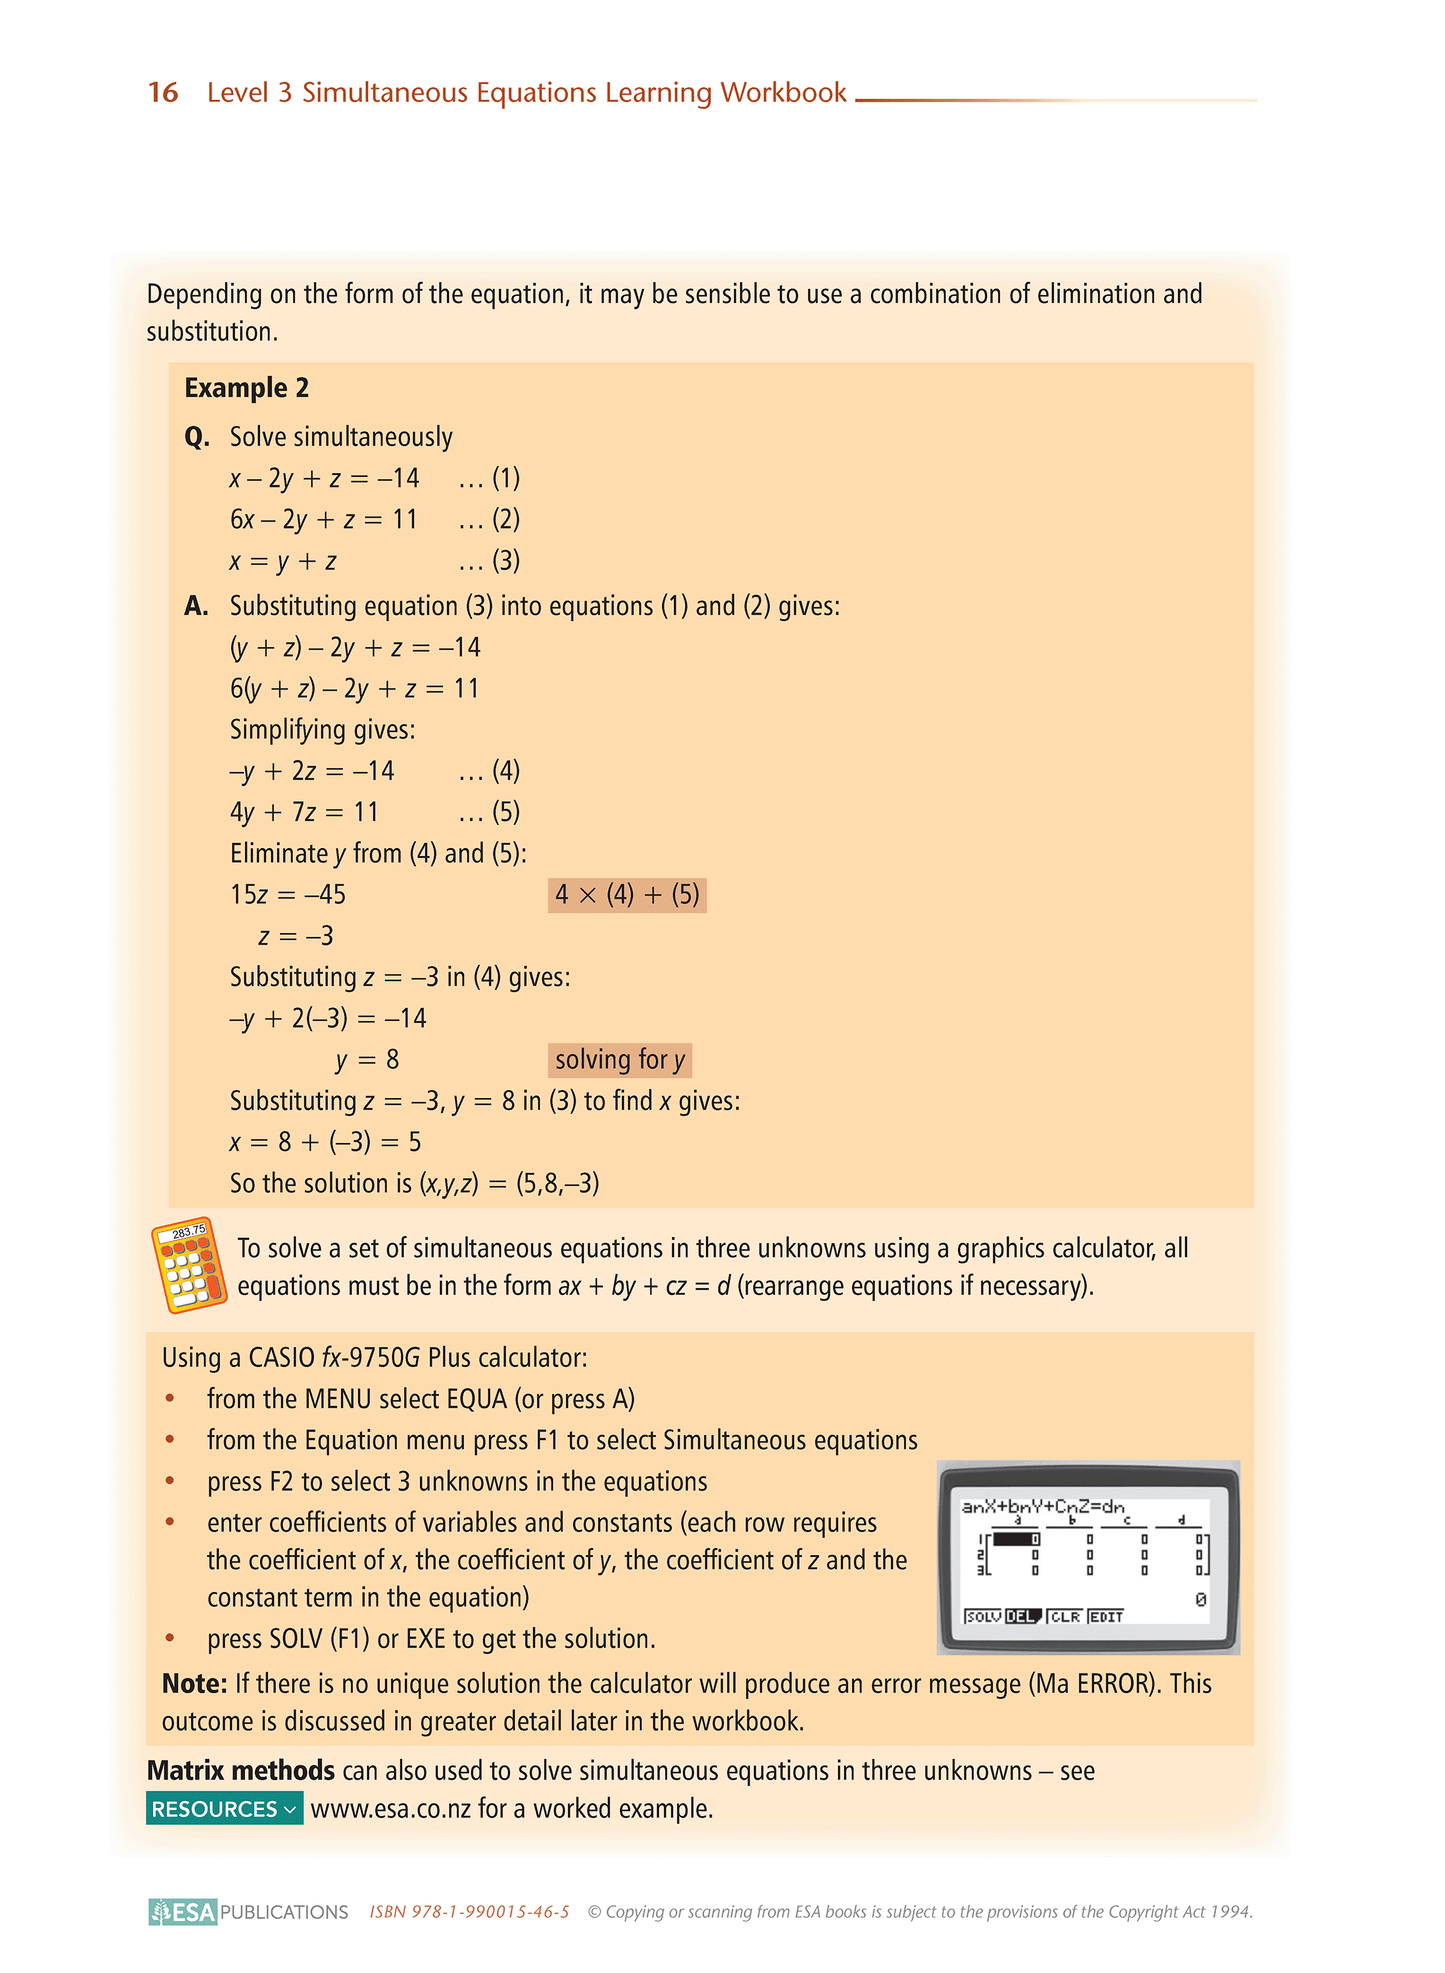 Level 3 Simultaneous Equations 3.15 Learning Workbook